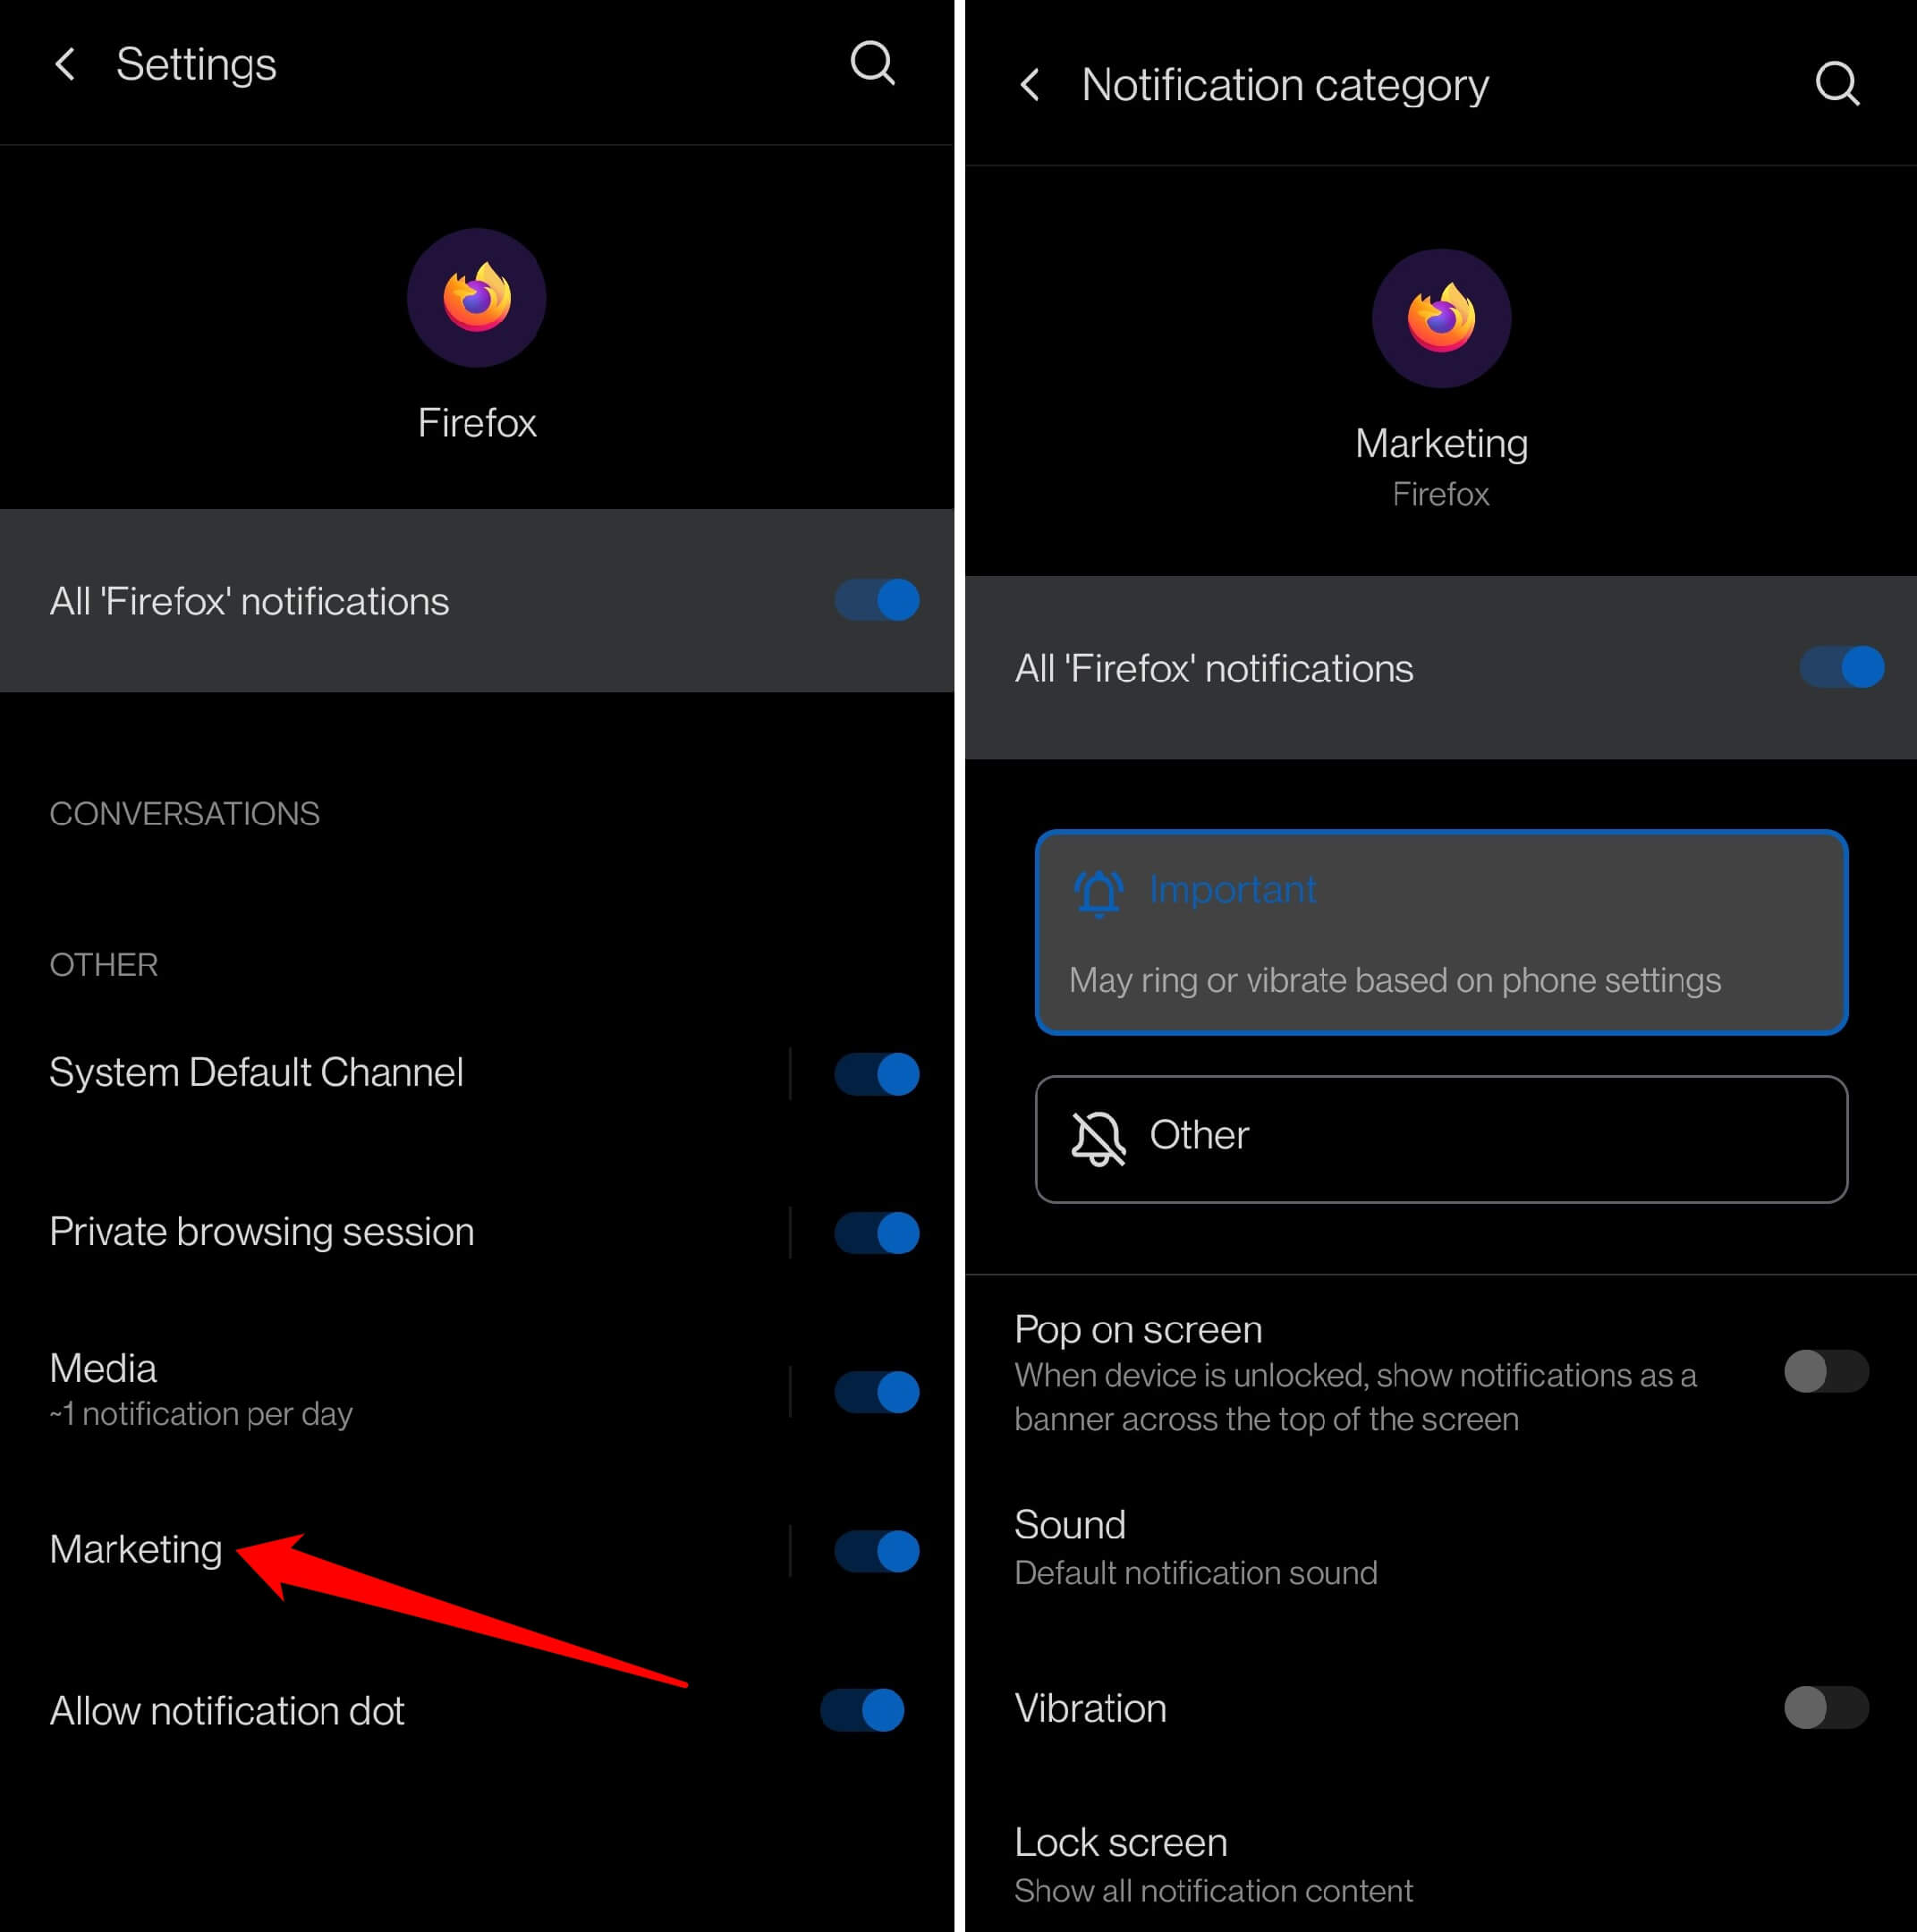 enable or disable marketing notifications on Firefox Android